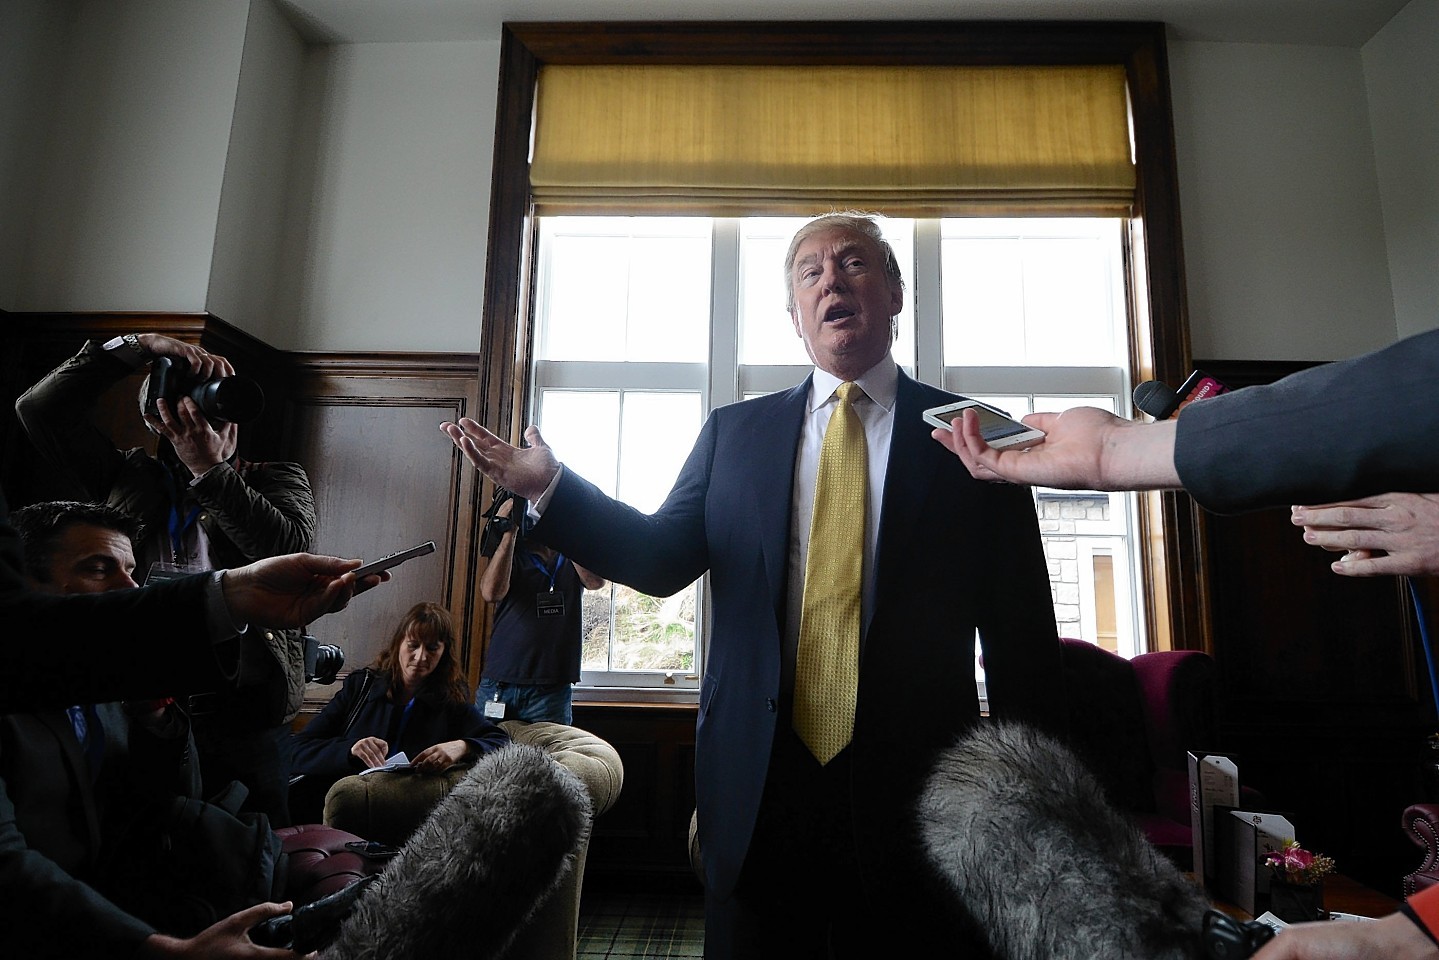 American Billionaire Donald Trump visits his Aberdeenshire Golf Course at Menie to open the new clubhouse